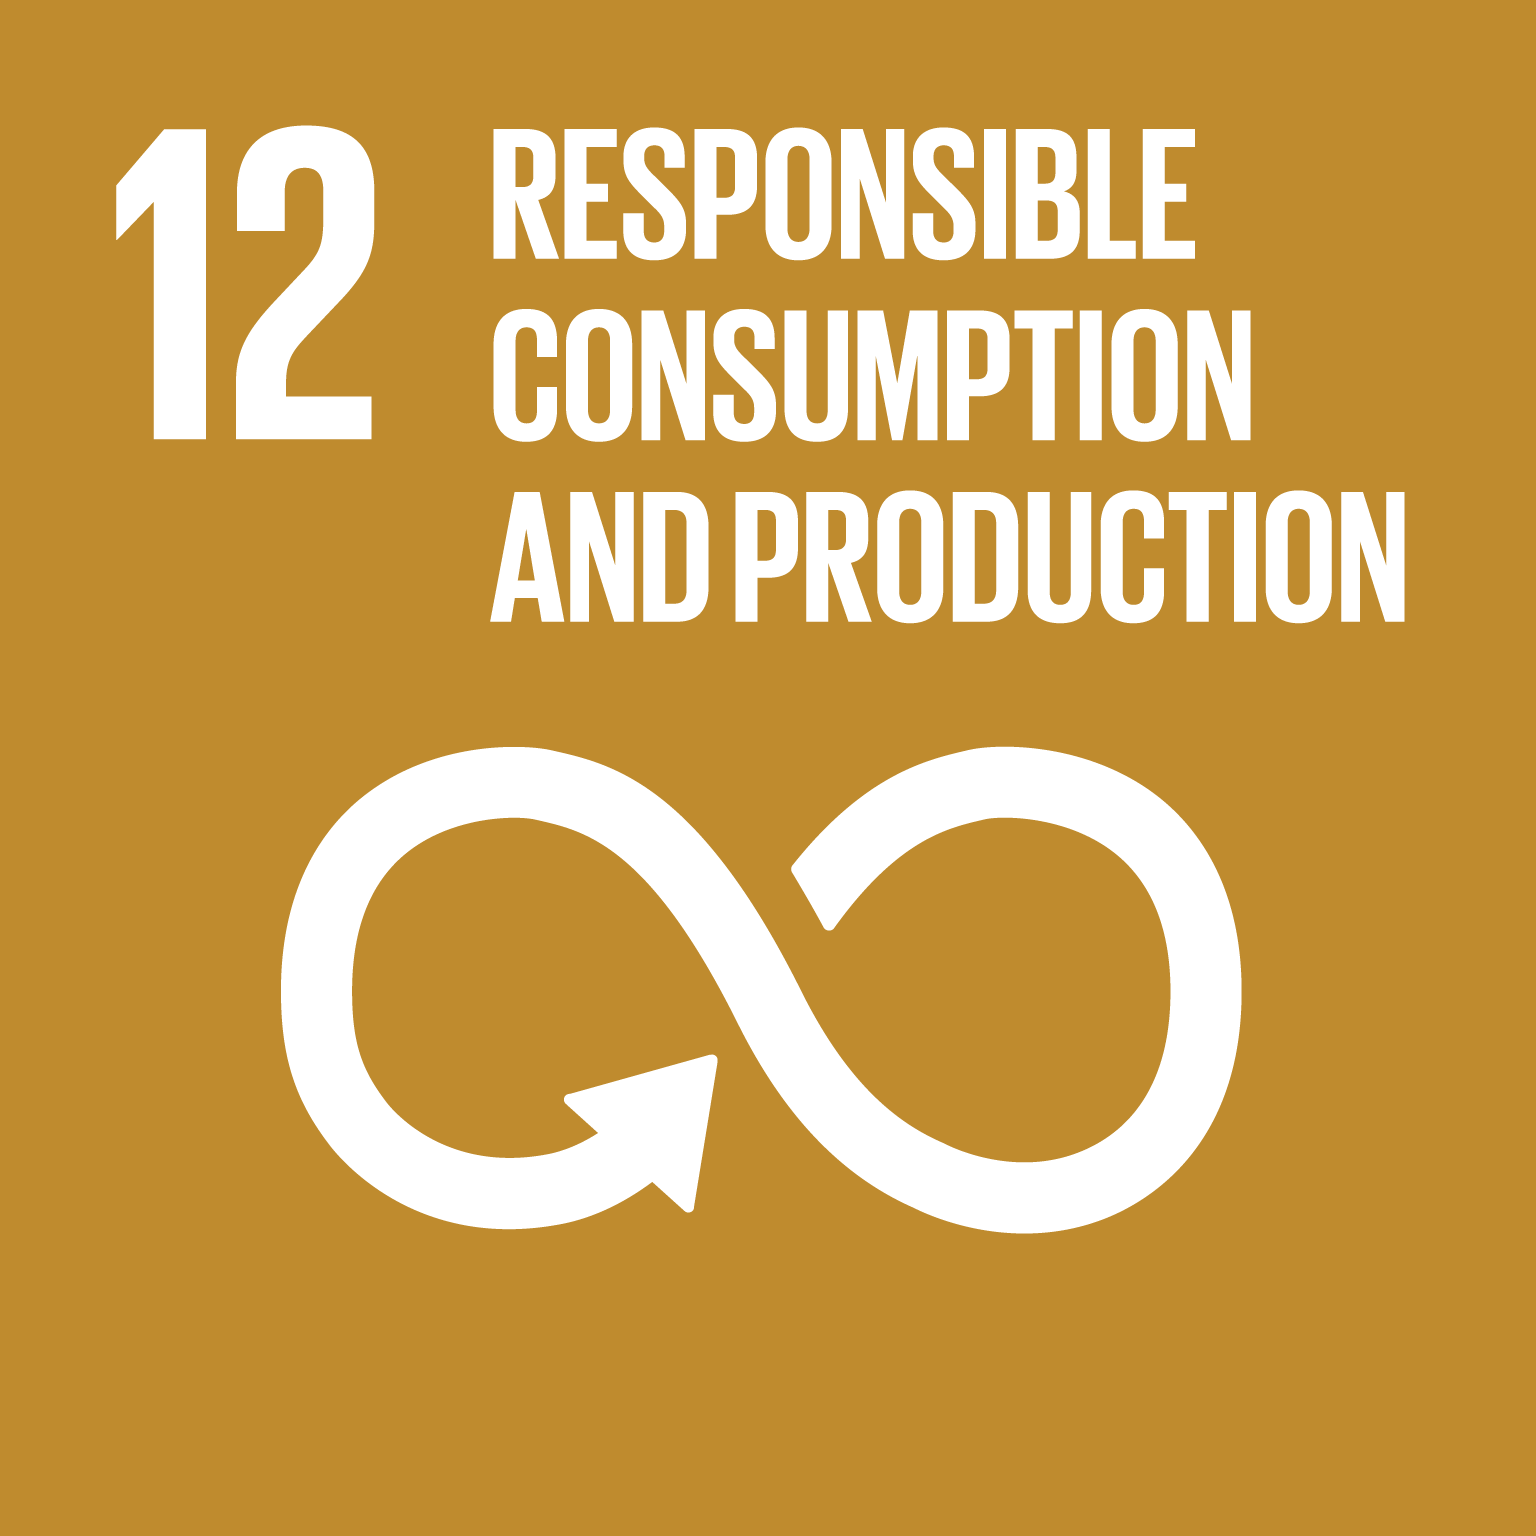 【SDGs logo】RESPONSIBLE CONSUMPTION AND PRODUCTION